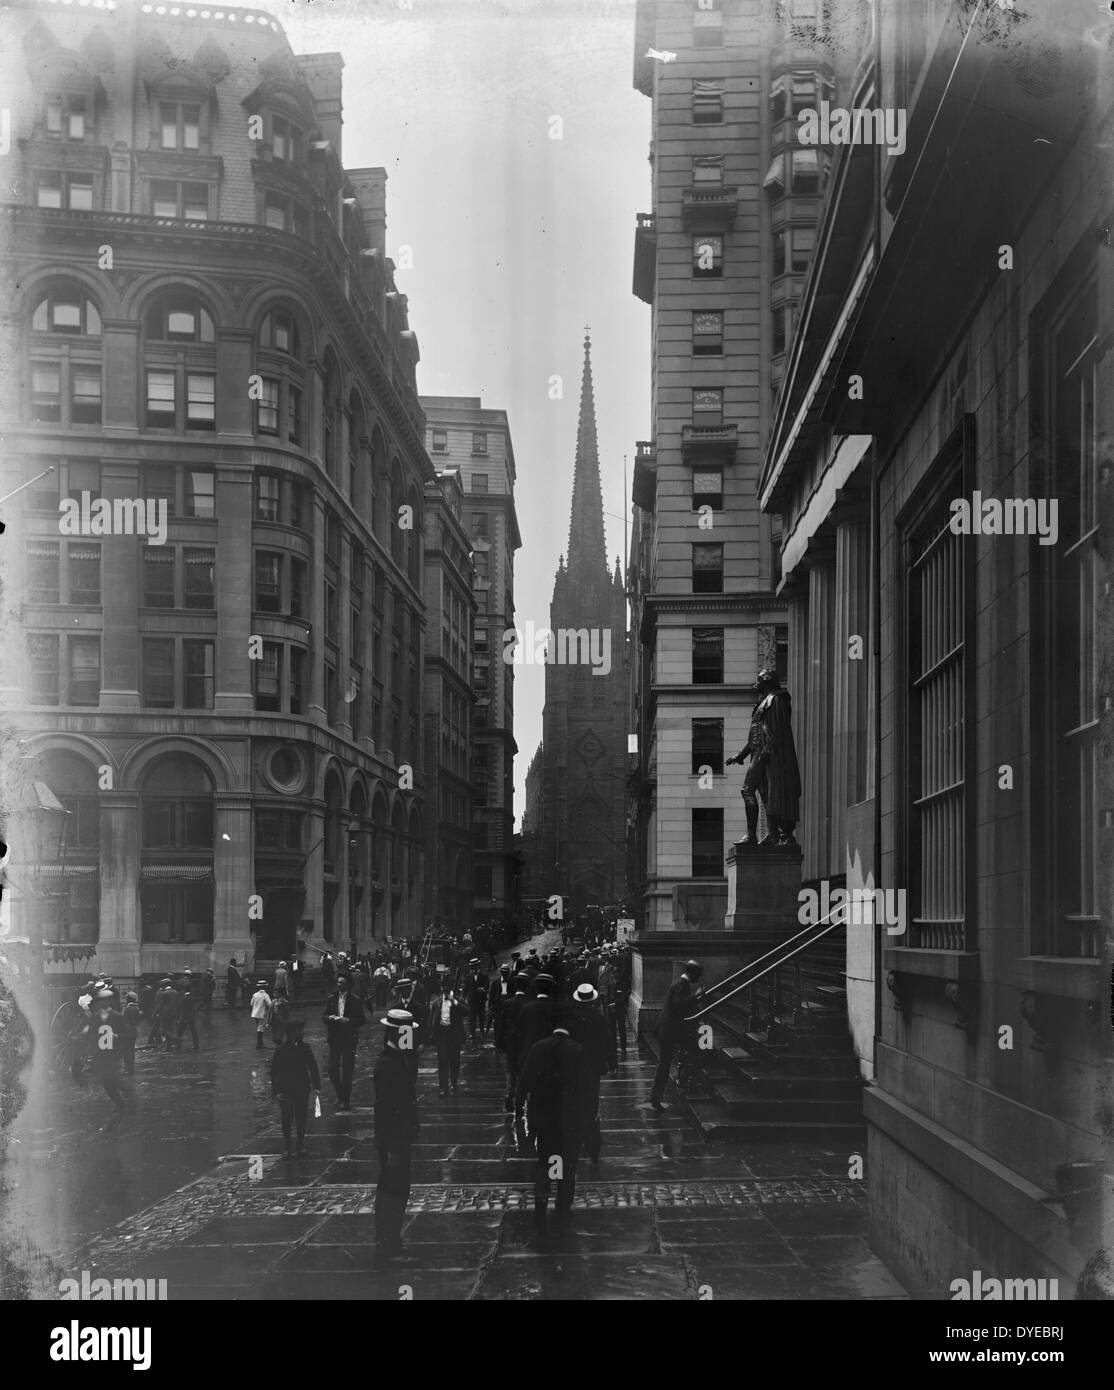 Wall Street, New York City during the early 1900's. Stock Photo